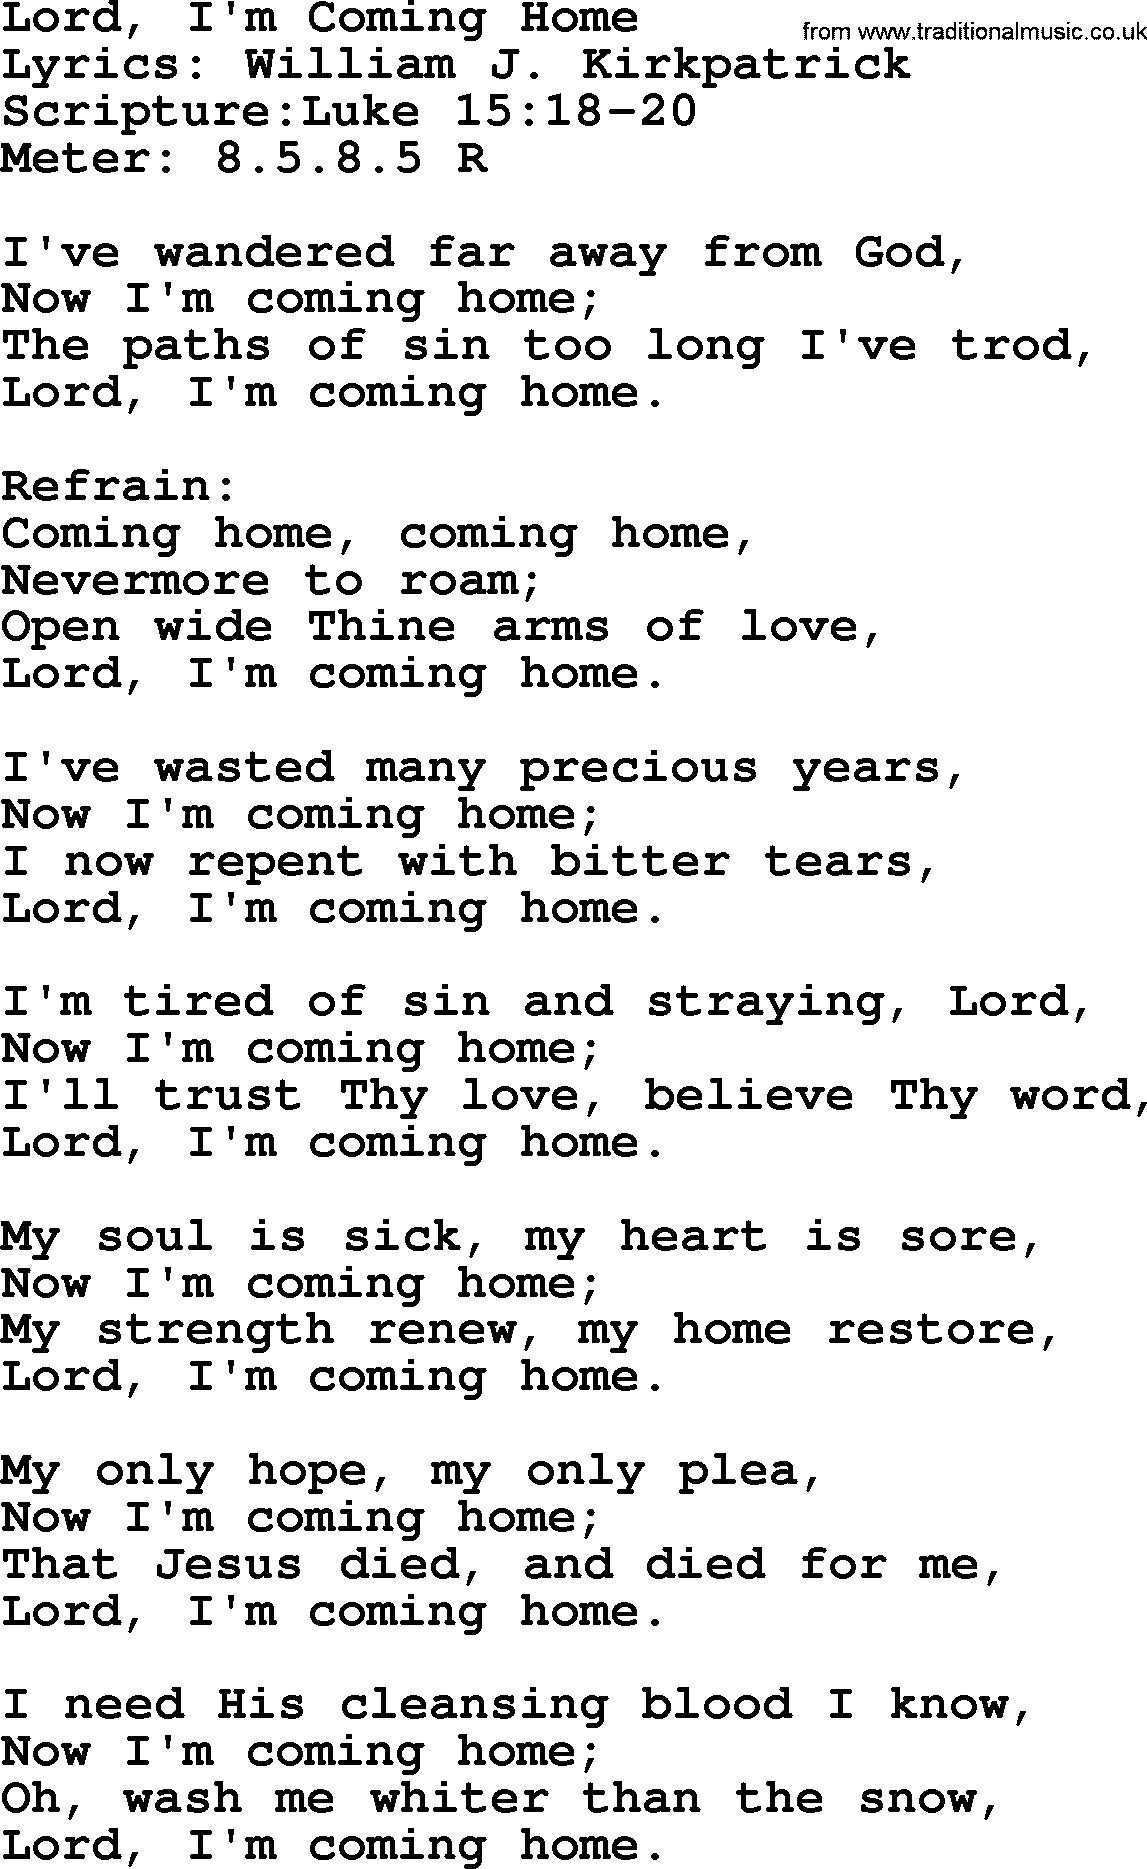 Hymns about  Angels, Hymn: Lord, I'm Coming Home, lyrics, sheet music, midi & Mp3 music with PDF